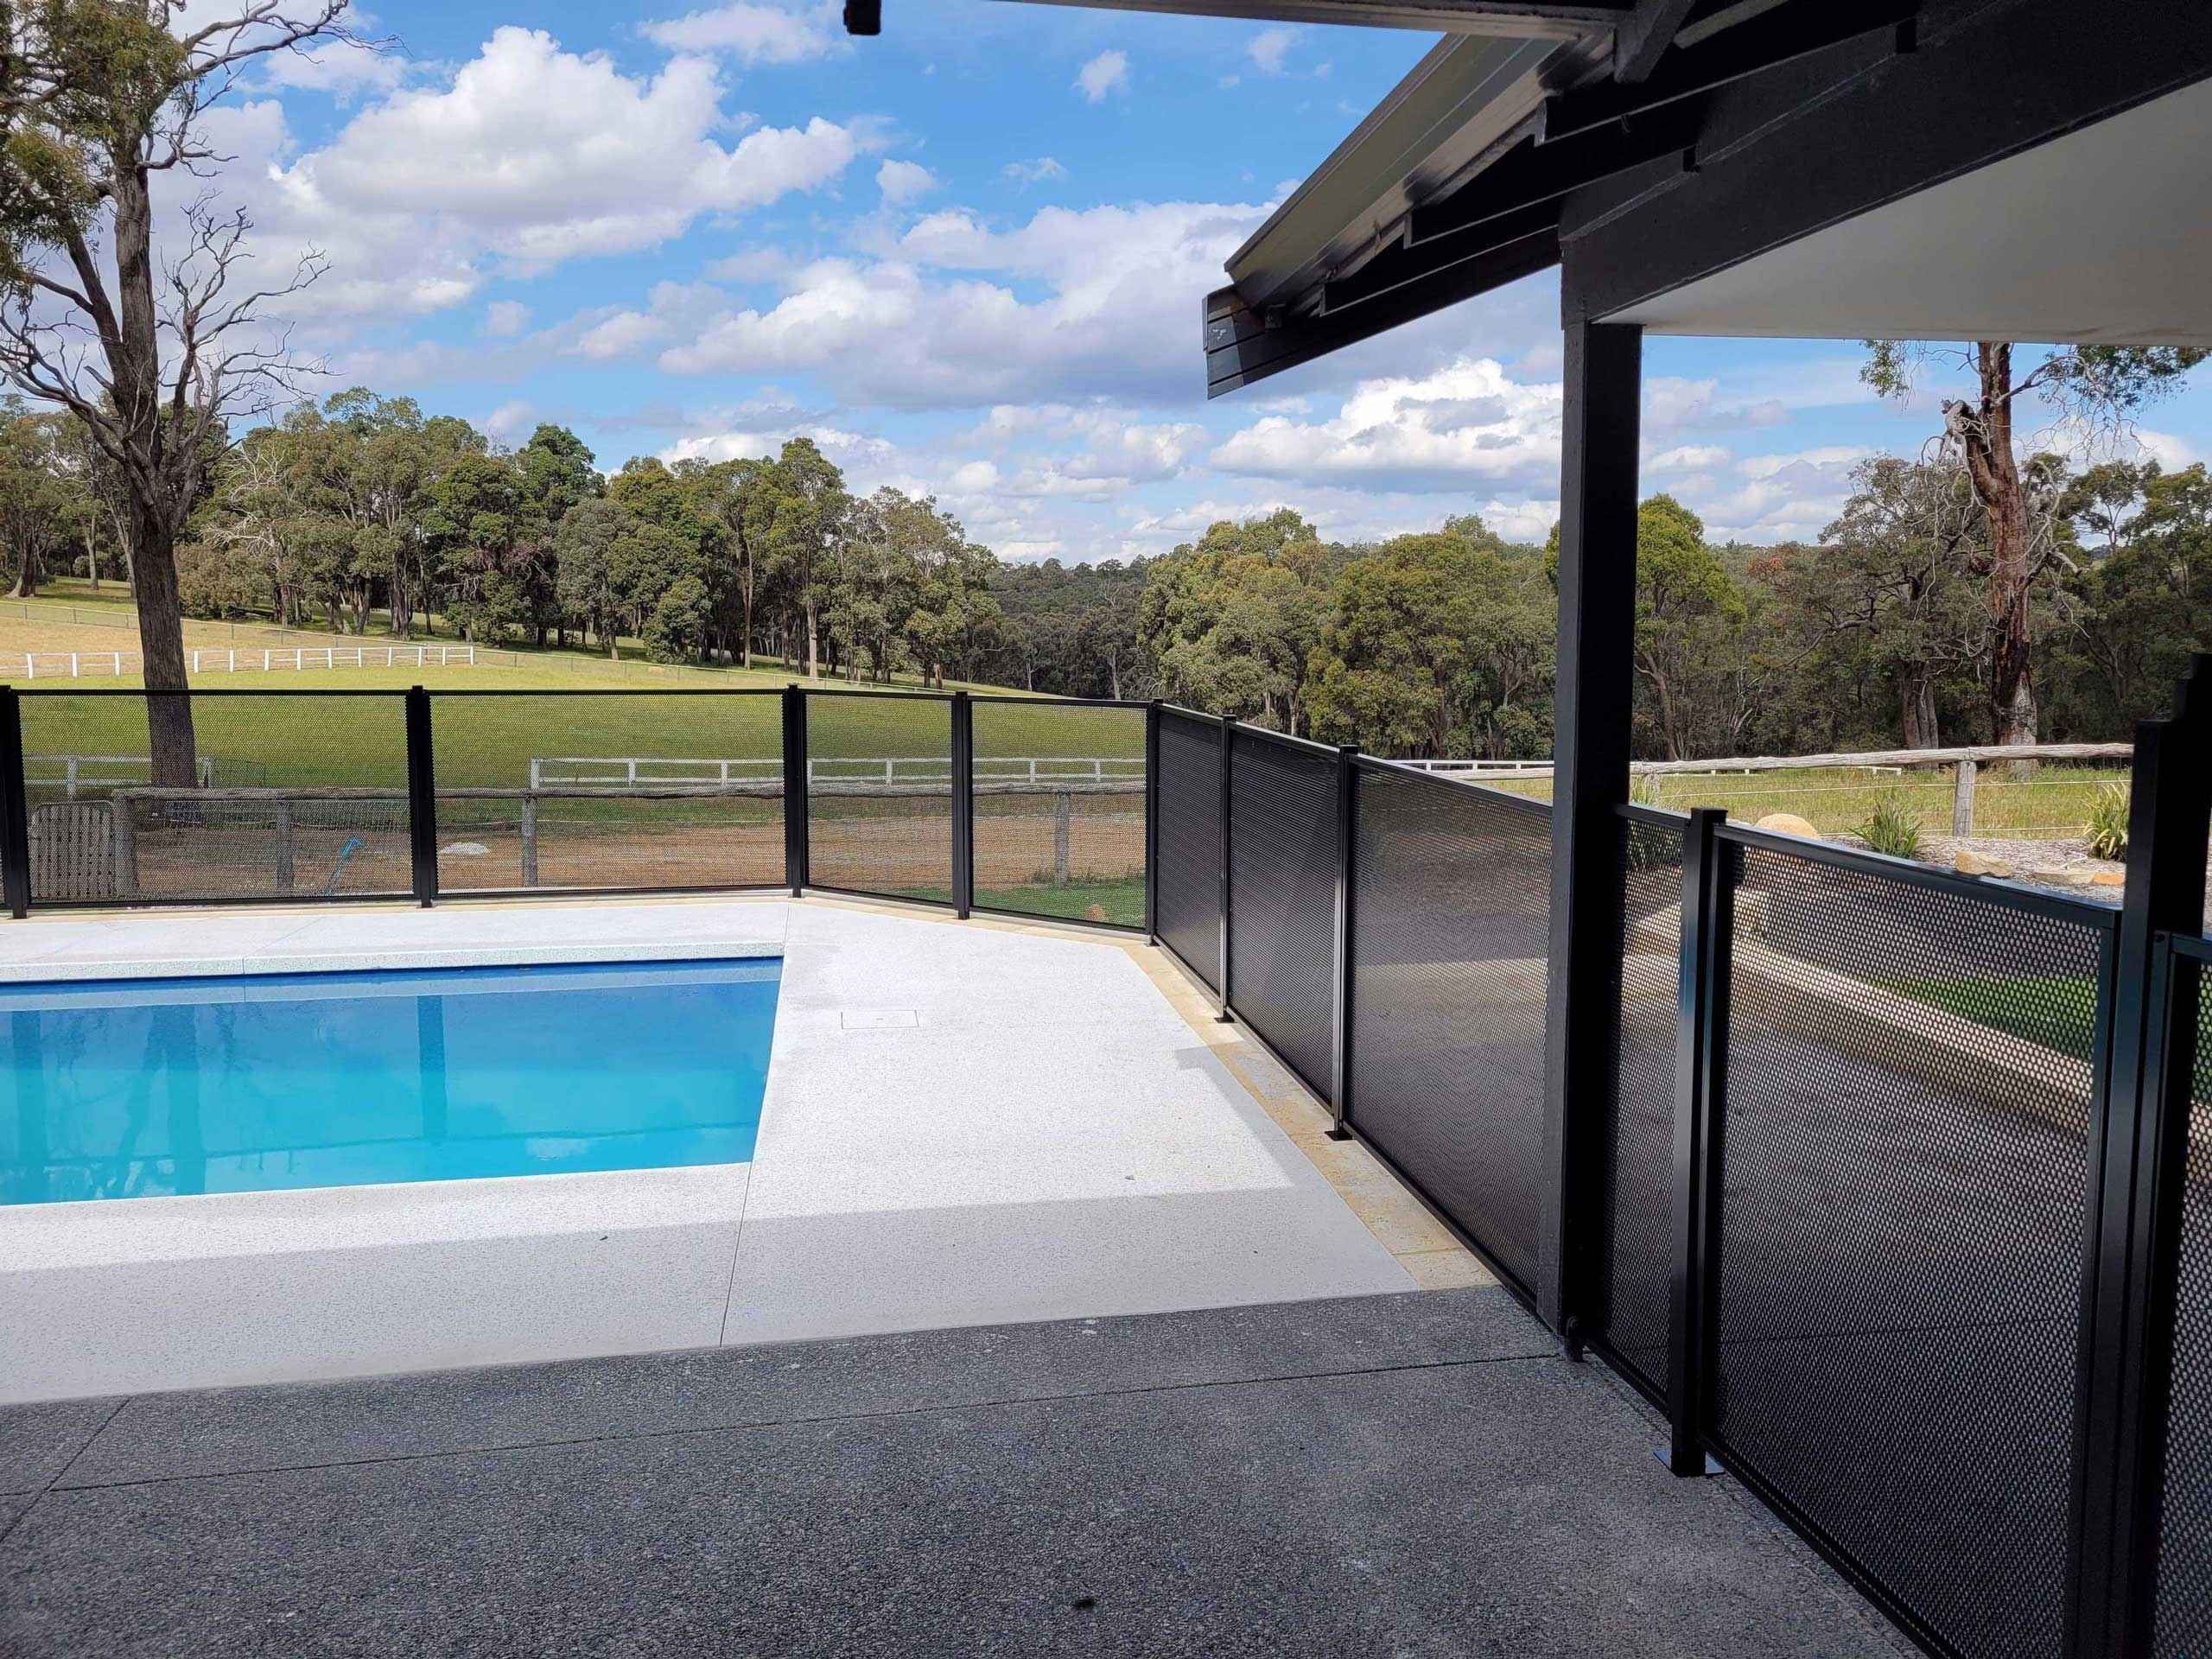 Perforated pool fencing around a pool in the country